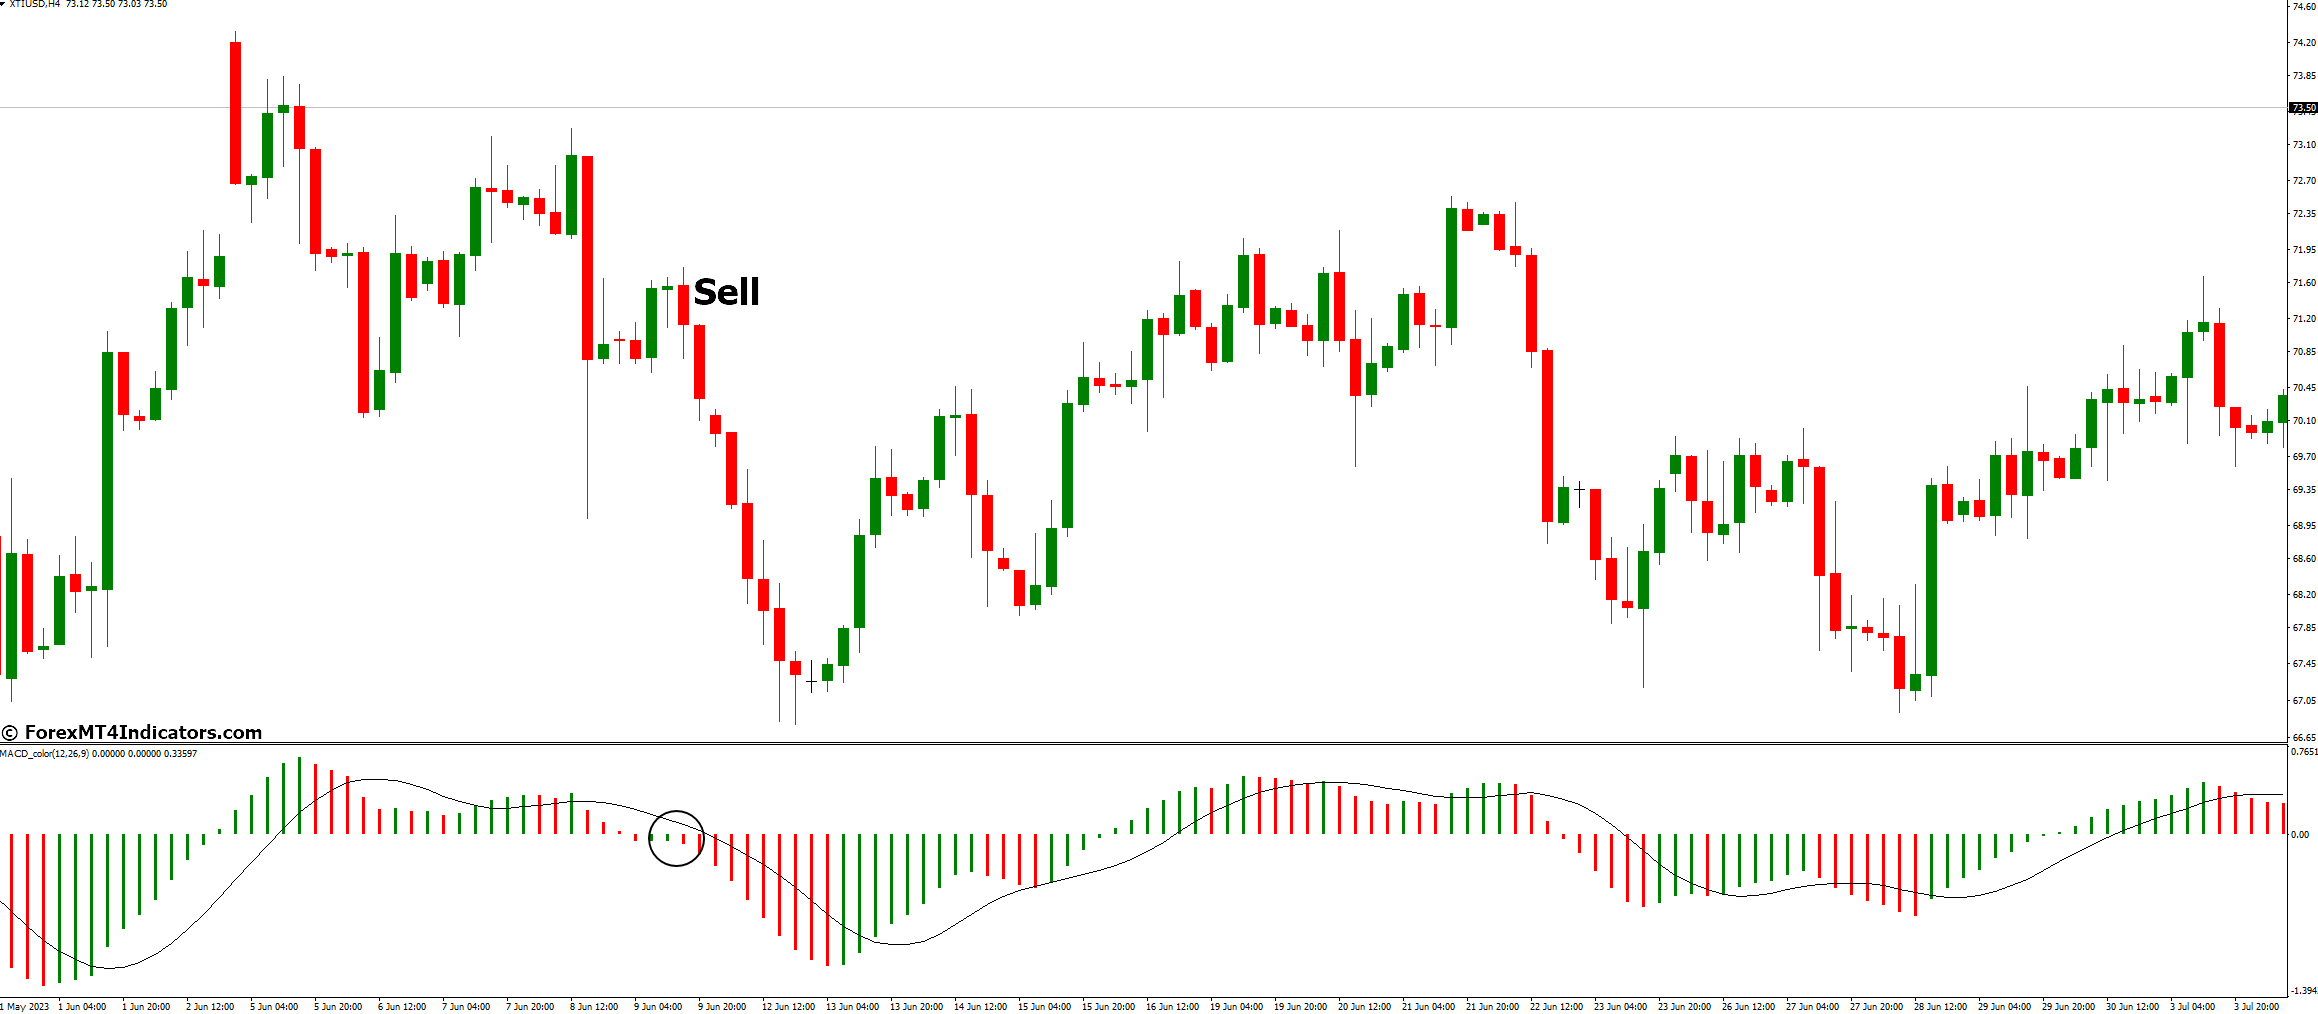 How to Trade with MACD Color Indicator - Sell Entry